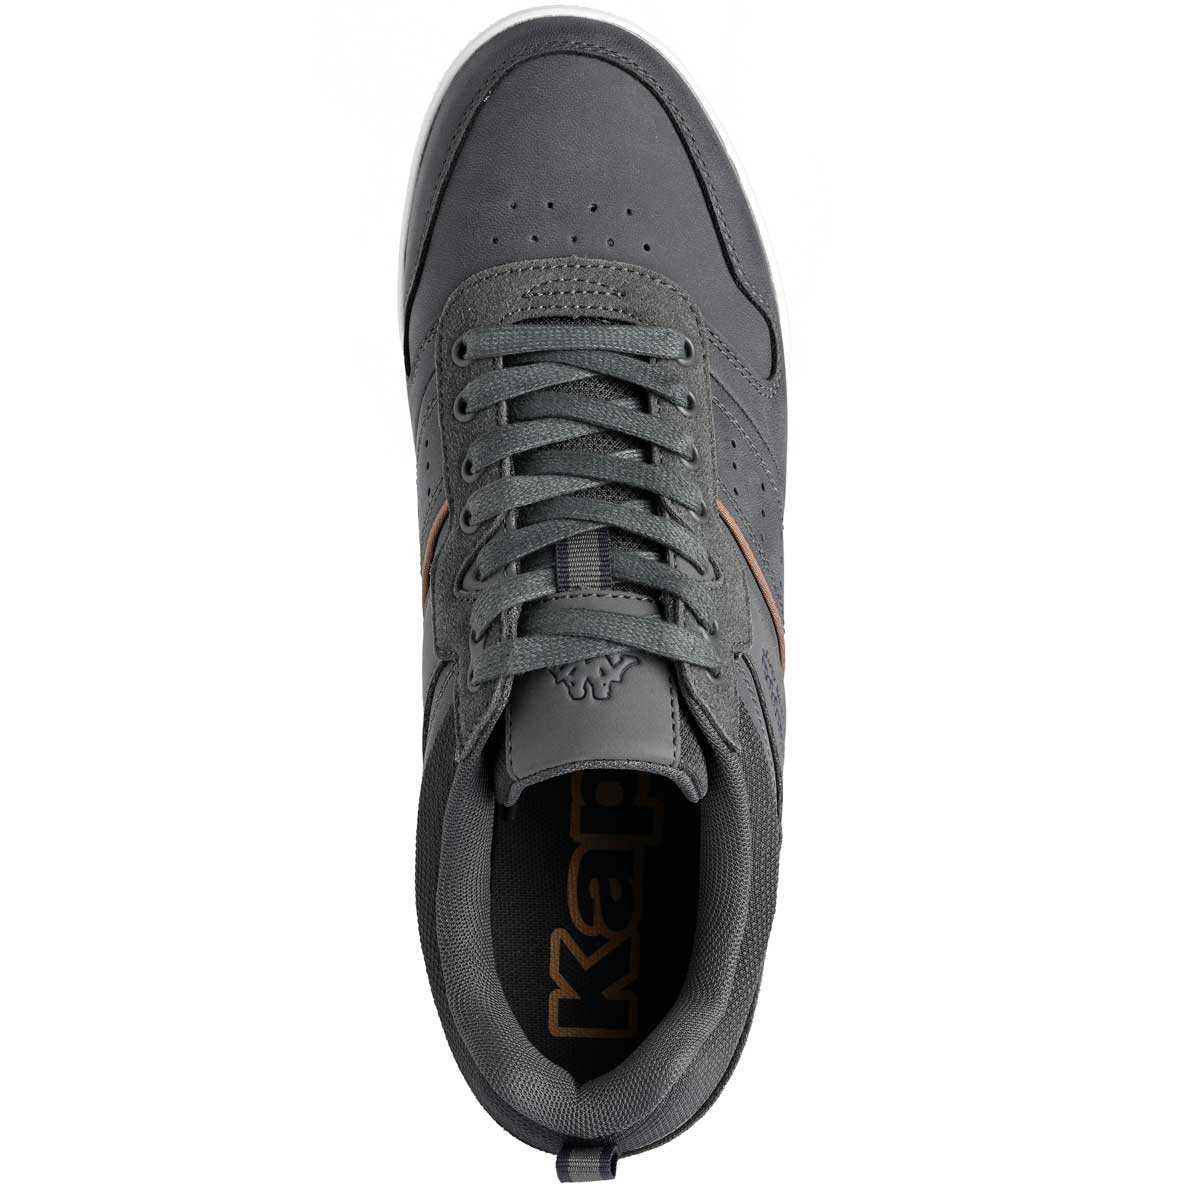 Chaussures lifestyle Lodam gris homme